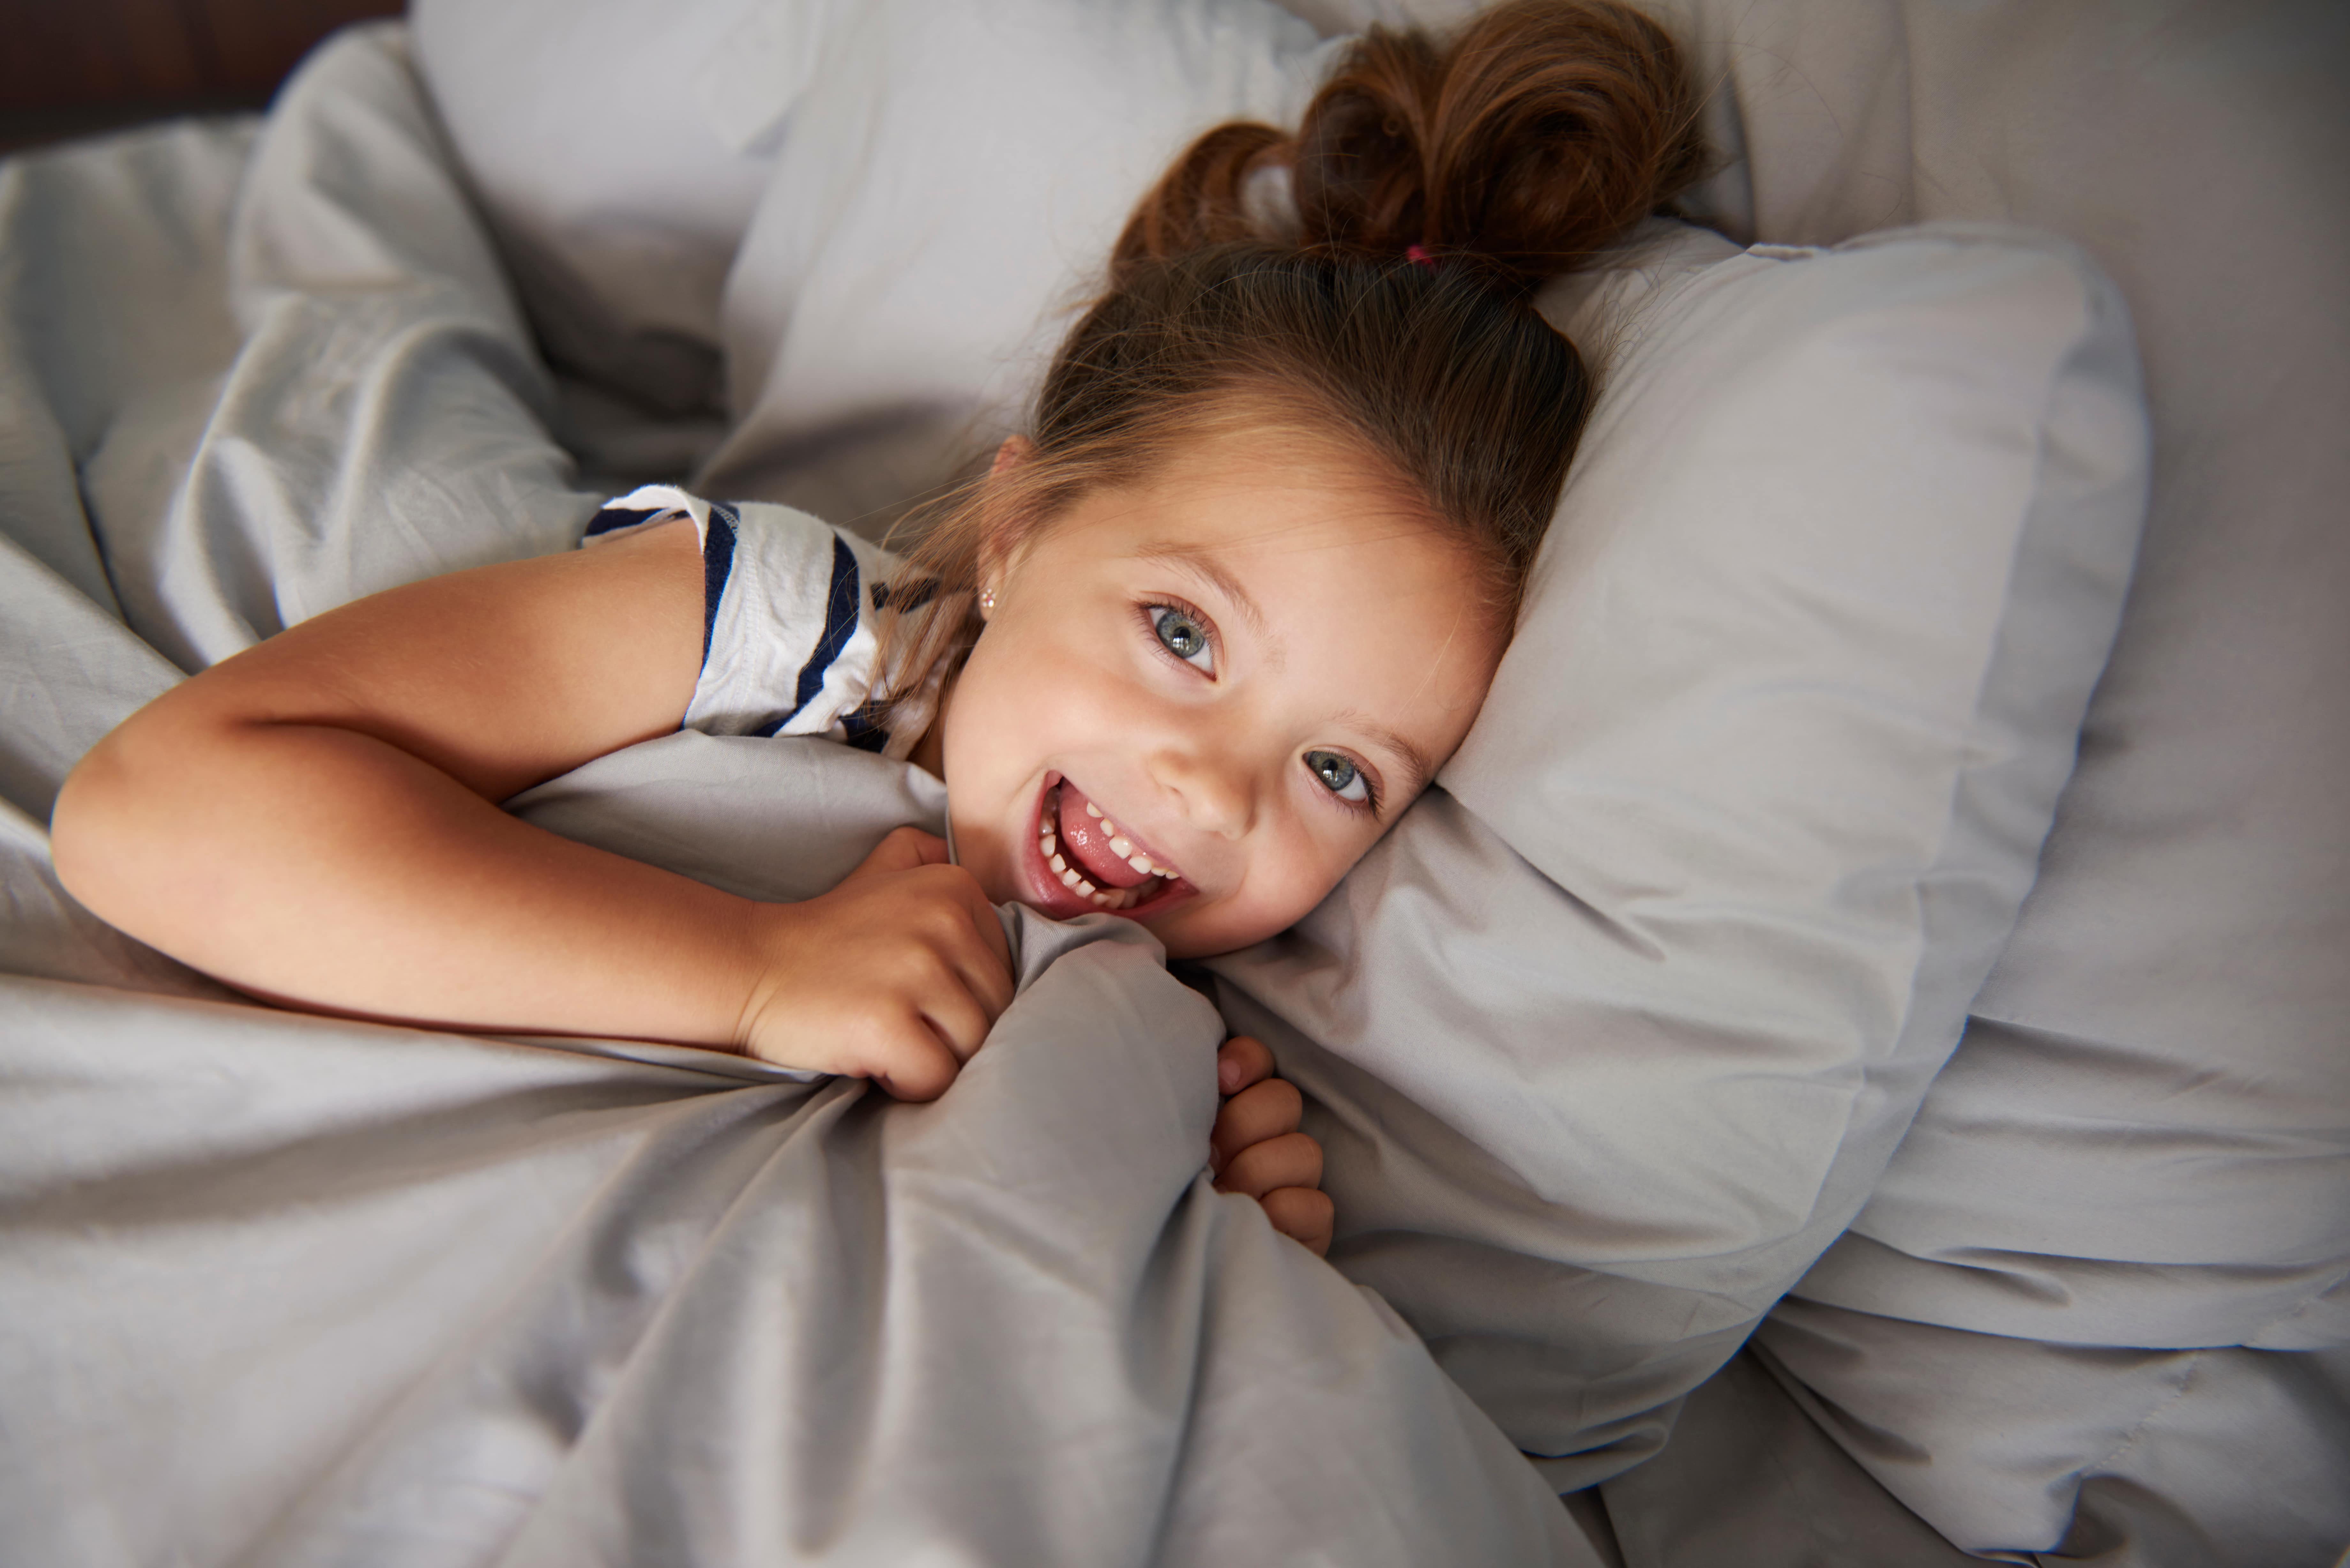 Girl in bed smiling and clutching duvet under her chin.